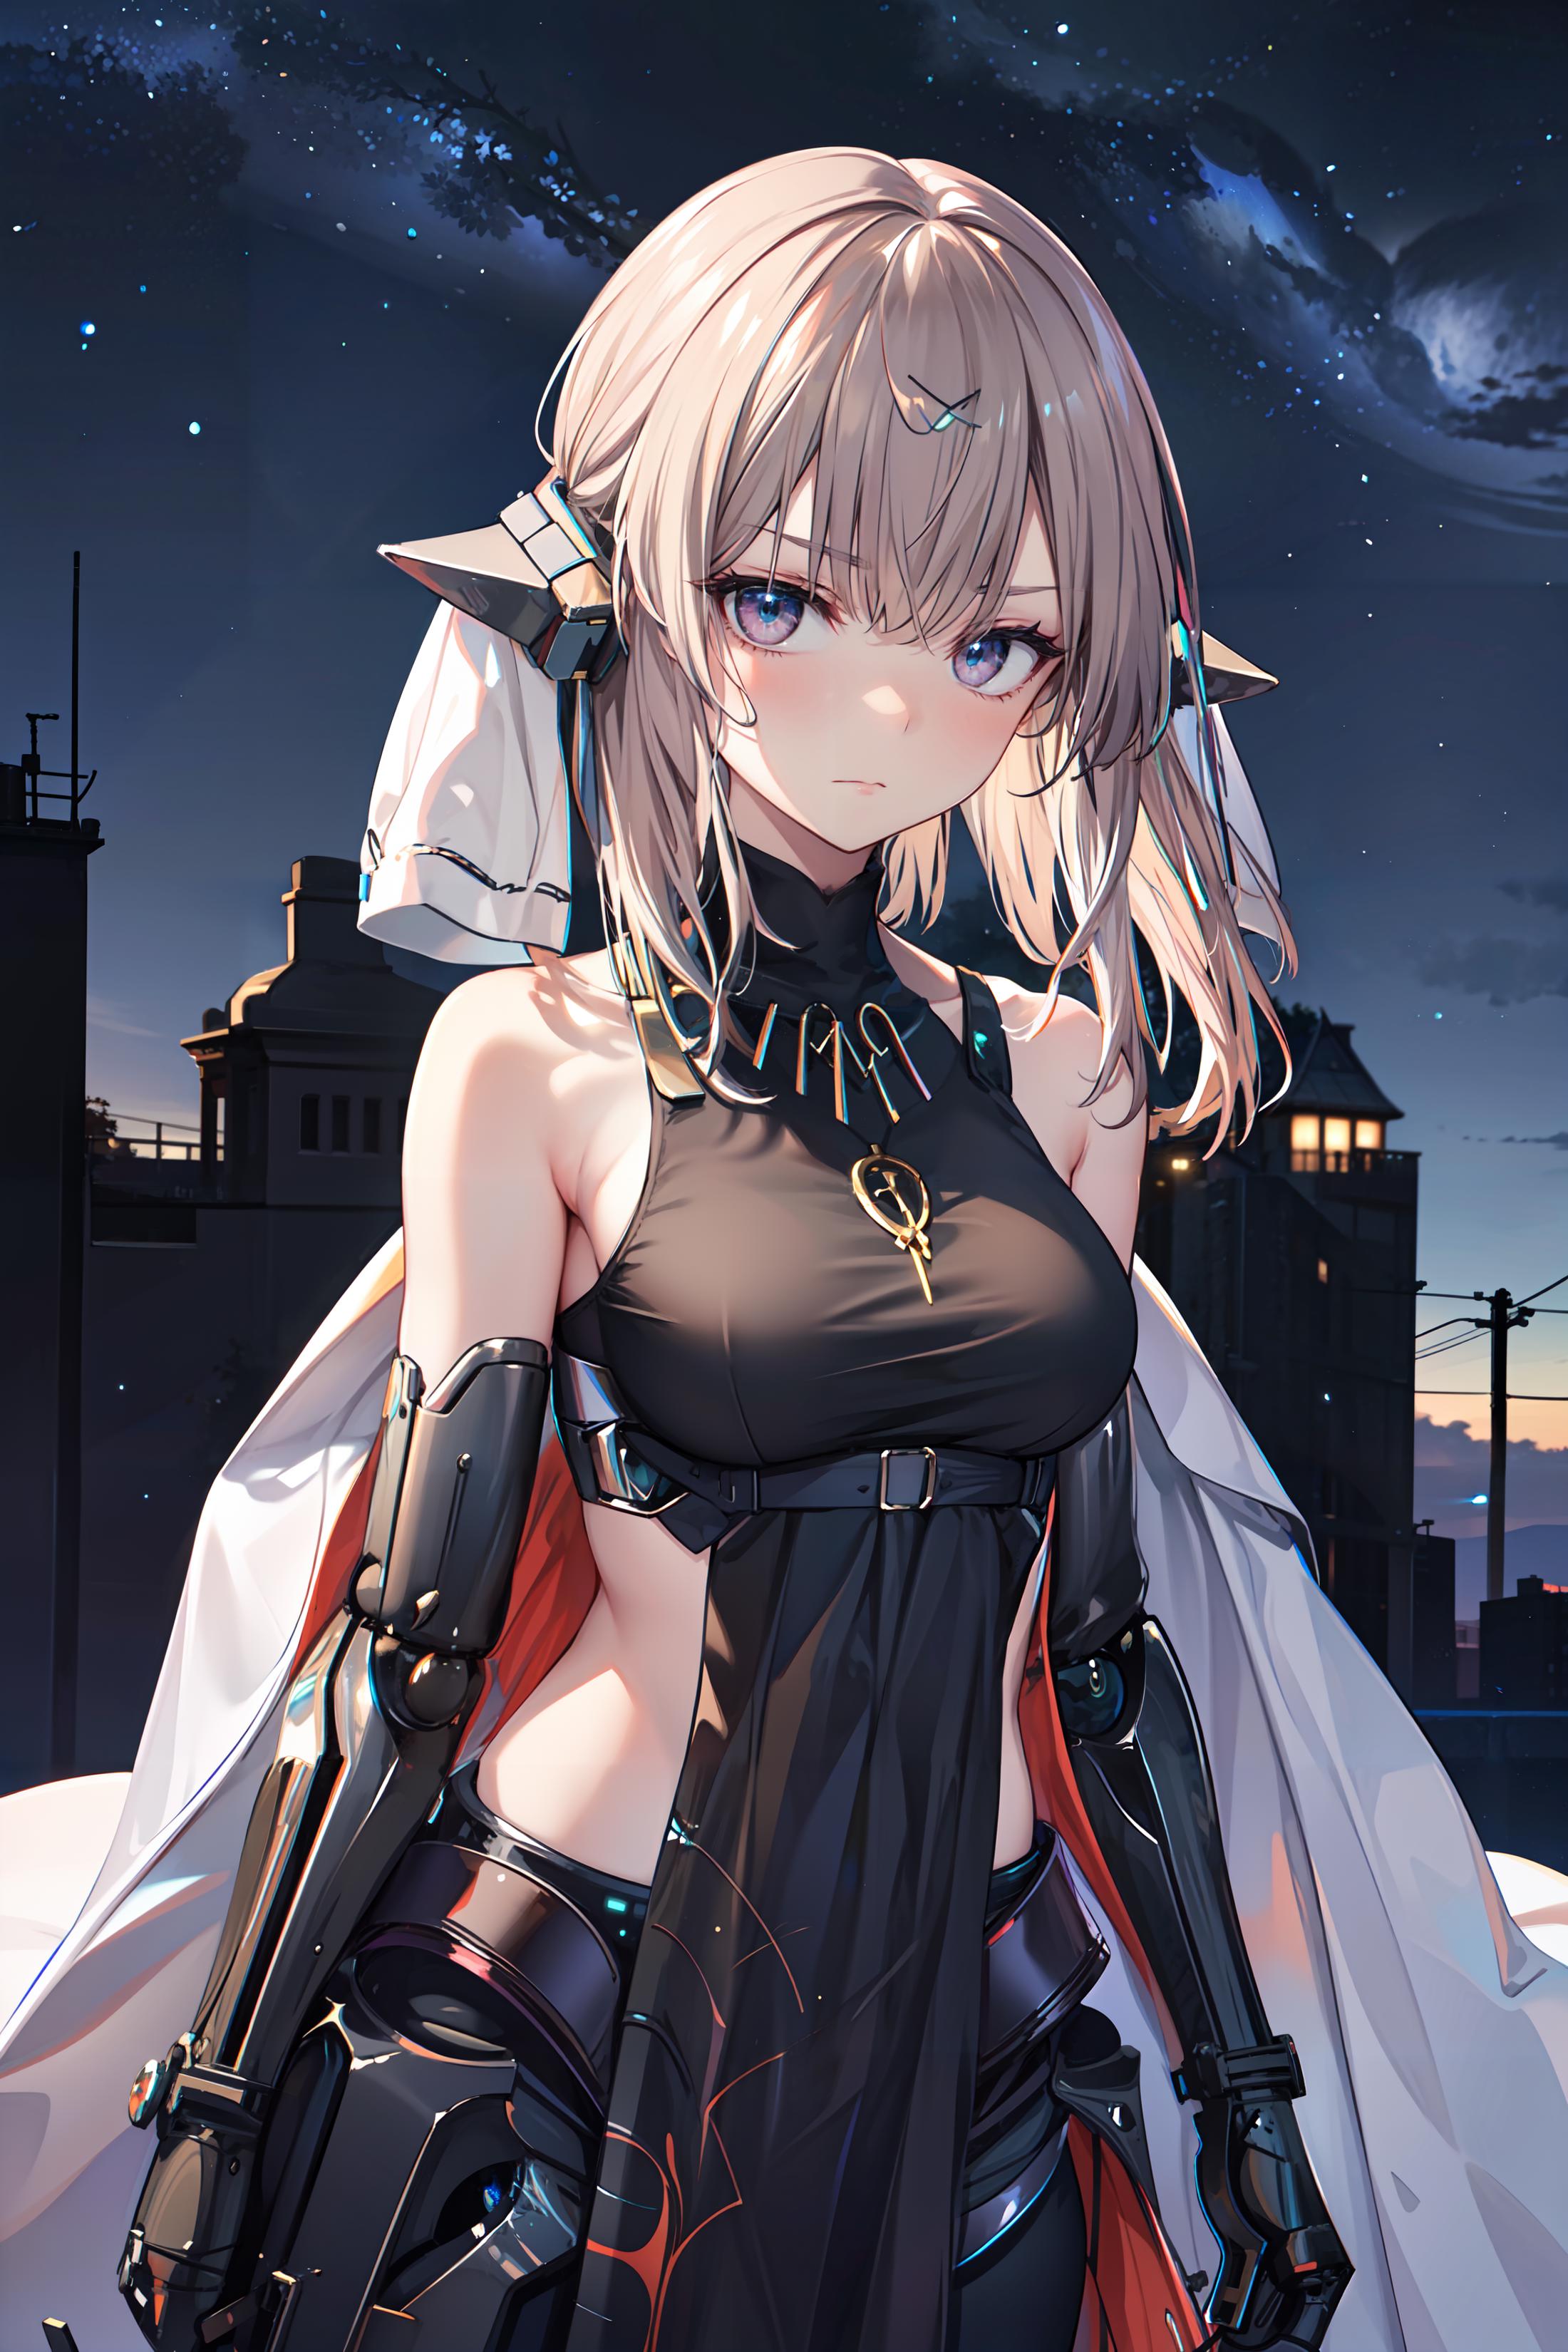 Girls' Frontline-AR57(With multires noise version) image by l1408